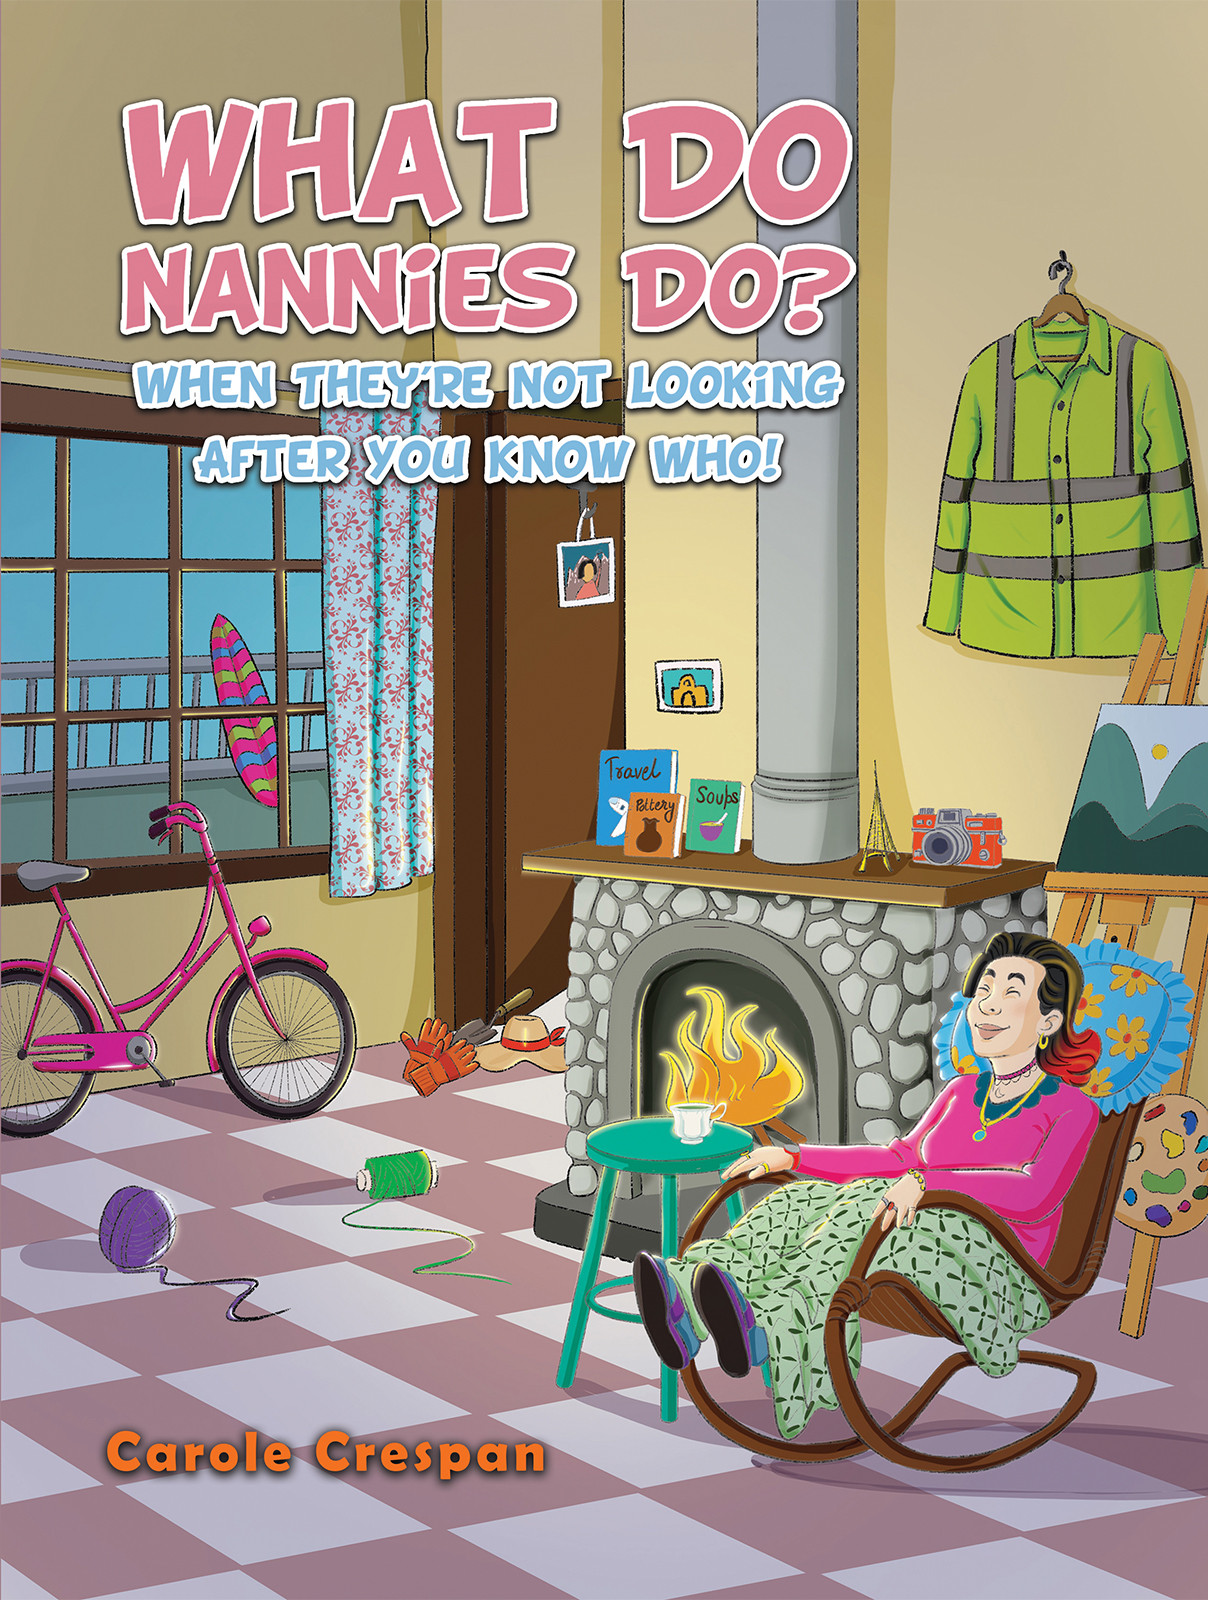 What Do Nannies Do? When They're Not Looking After You Know Who!